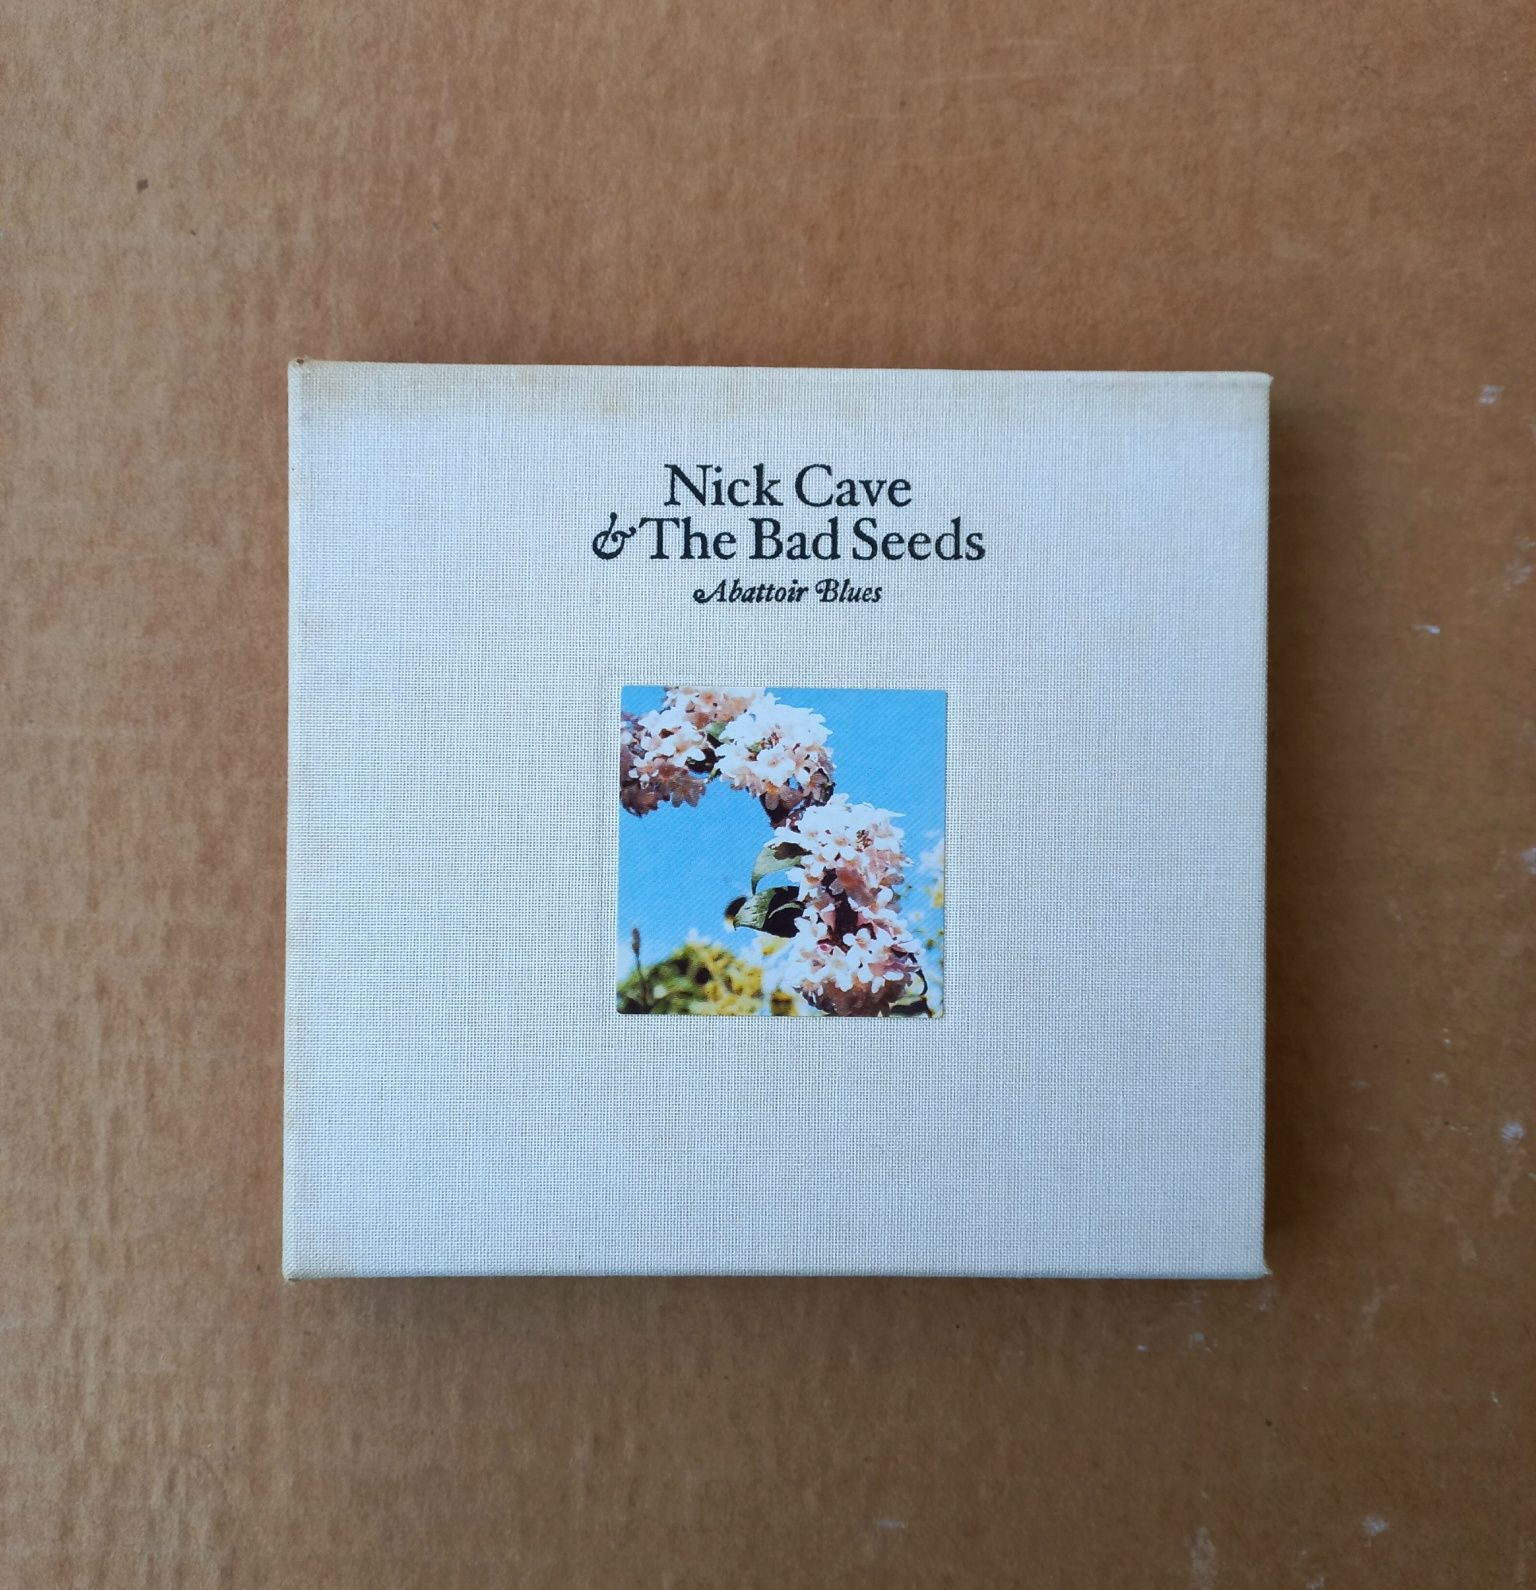 Nick Cave and The Bad Seeds 2 Cds Abattoir Blues/The Lyre of Orpheus